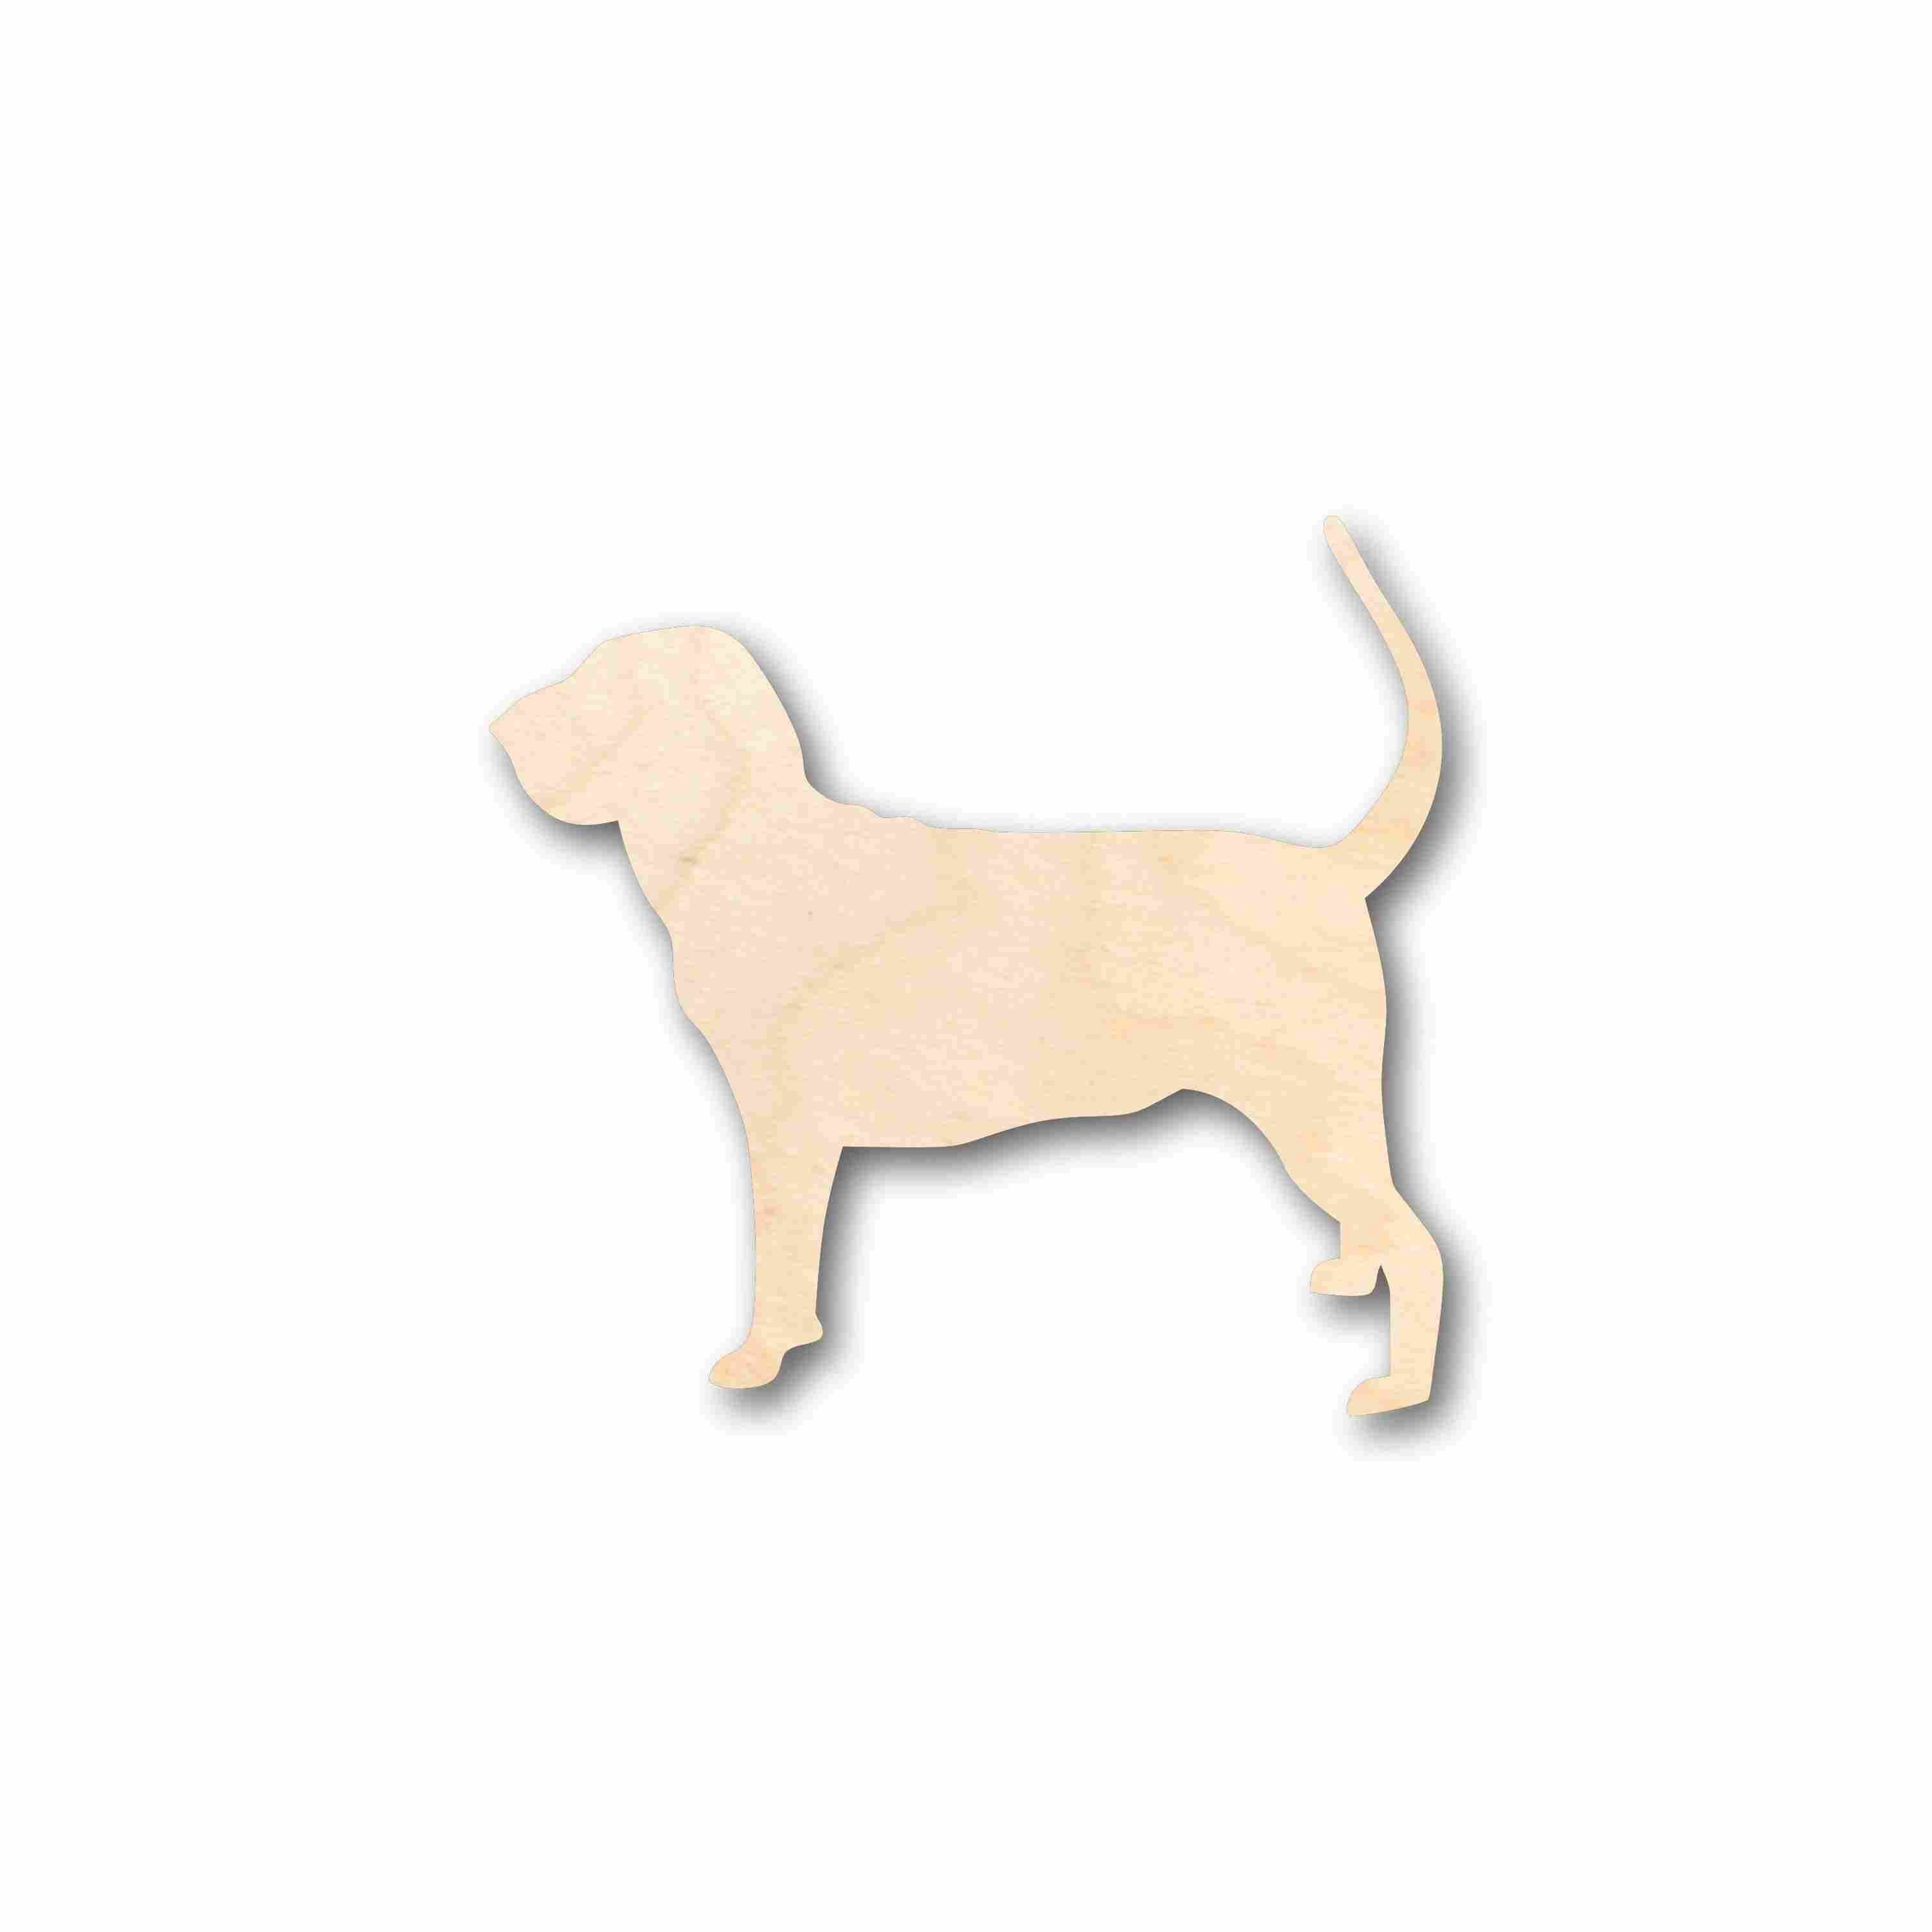 Unfinished Wood Bloodhound Dog Silhouette - Craft- up to 24